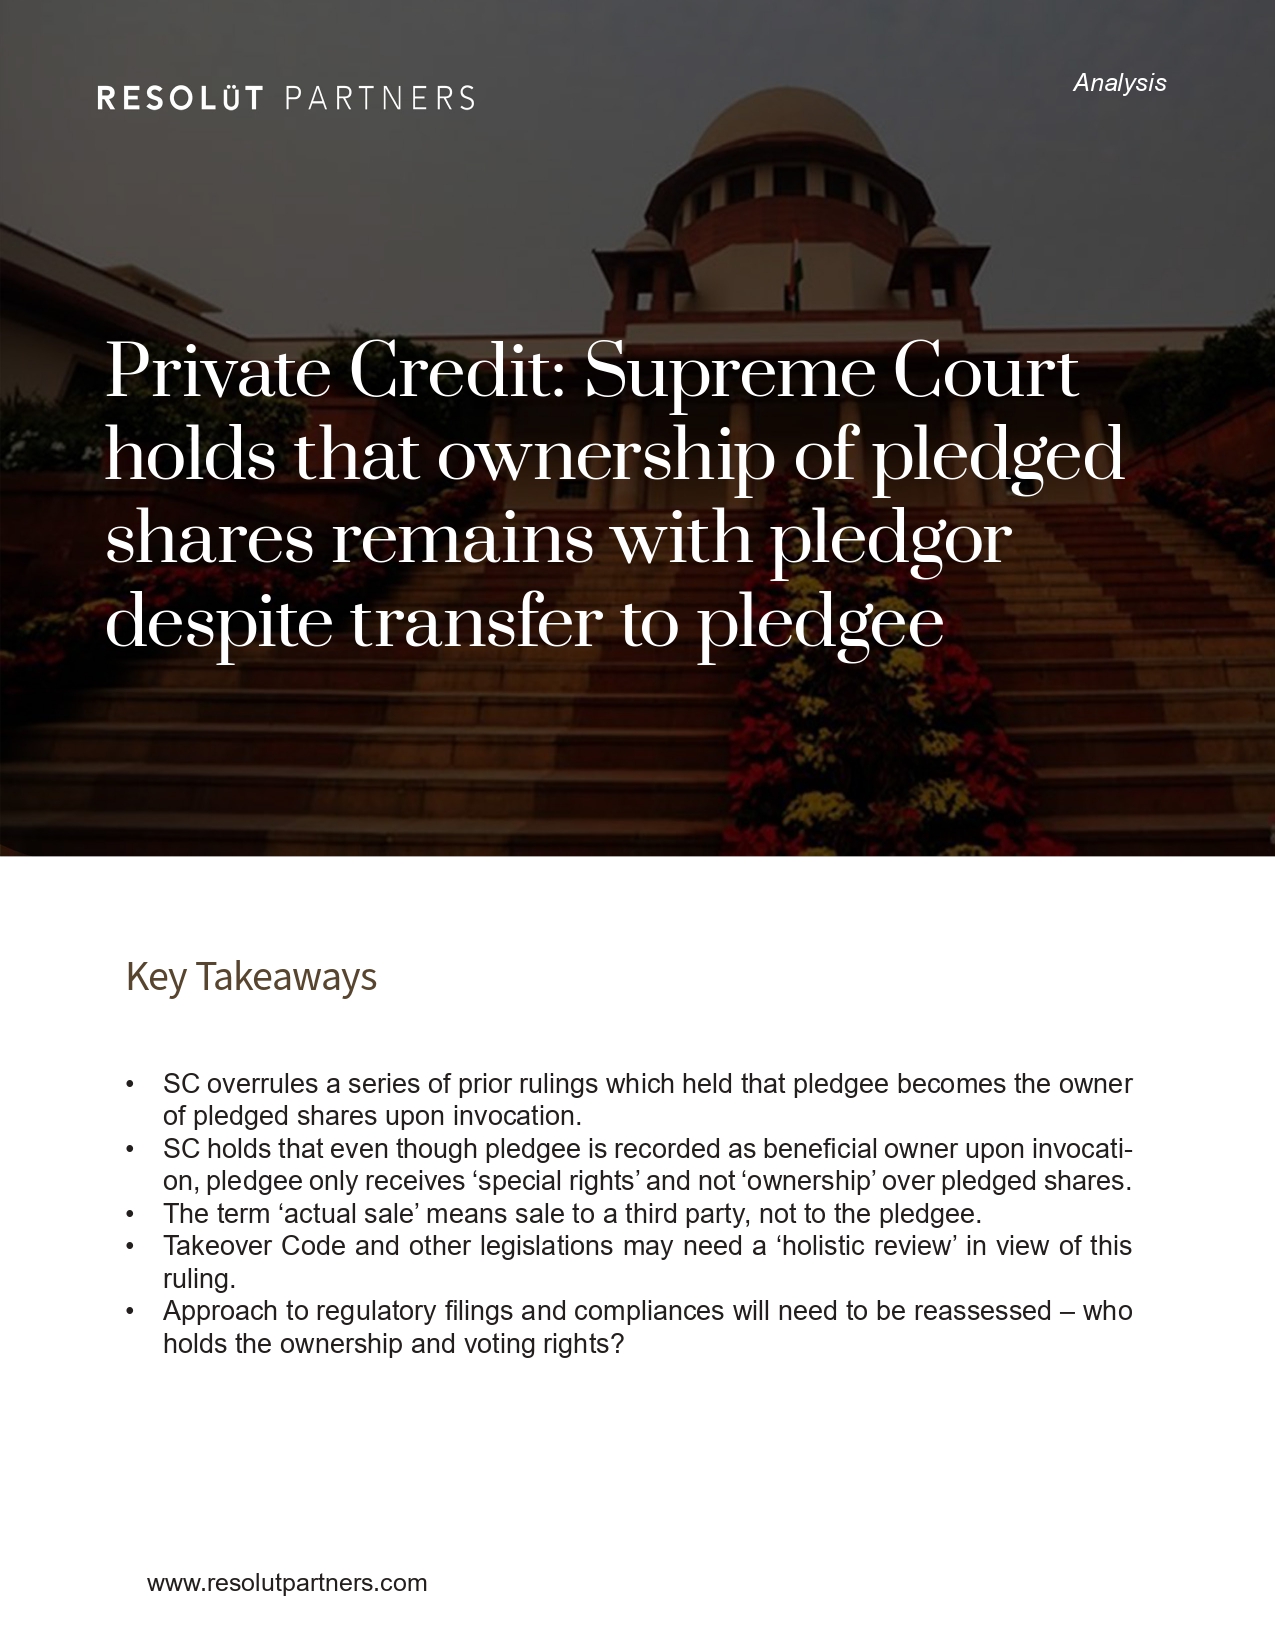 Share Pledge Article - Resolut Partners - 1_page-0001